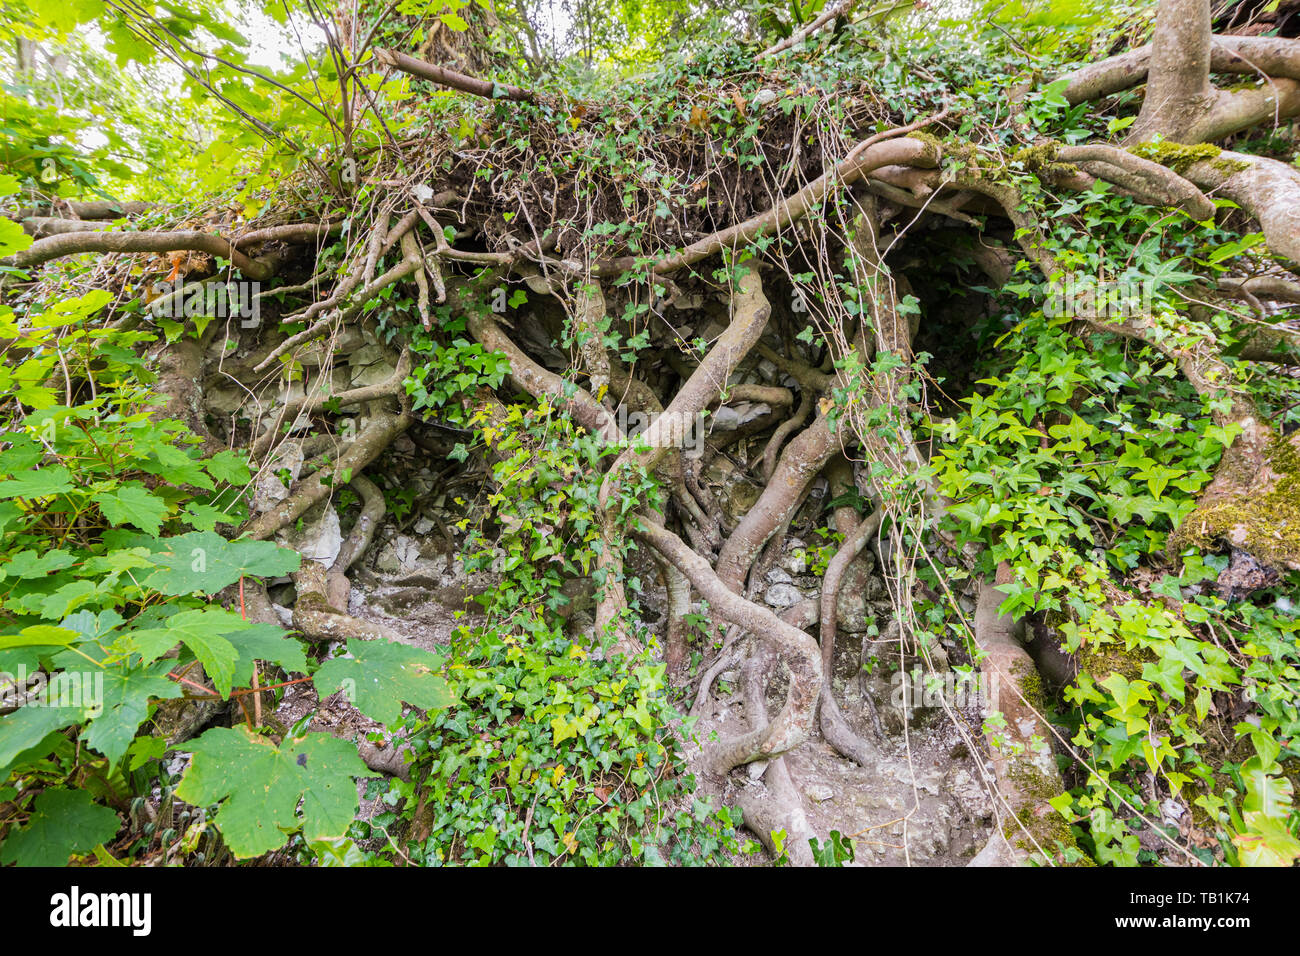 Large damaged tree leaning over showing exposed roots. Stock Photo